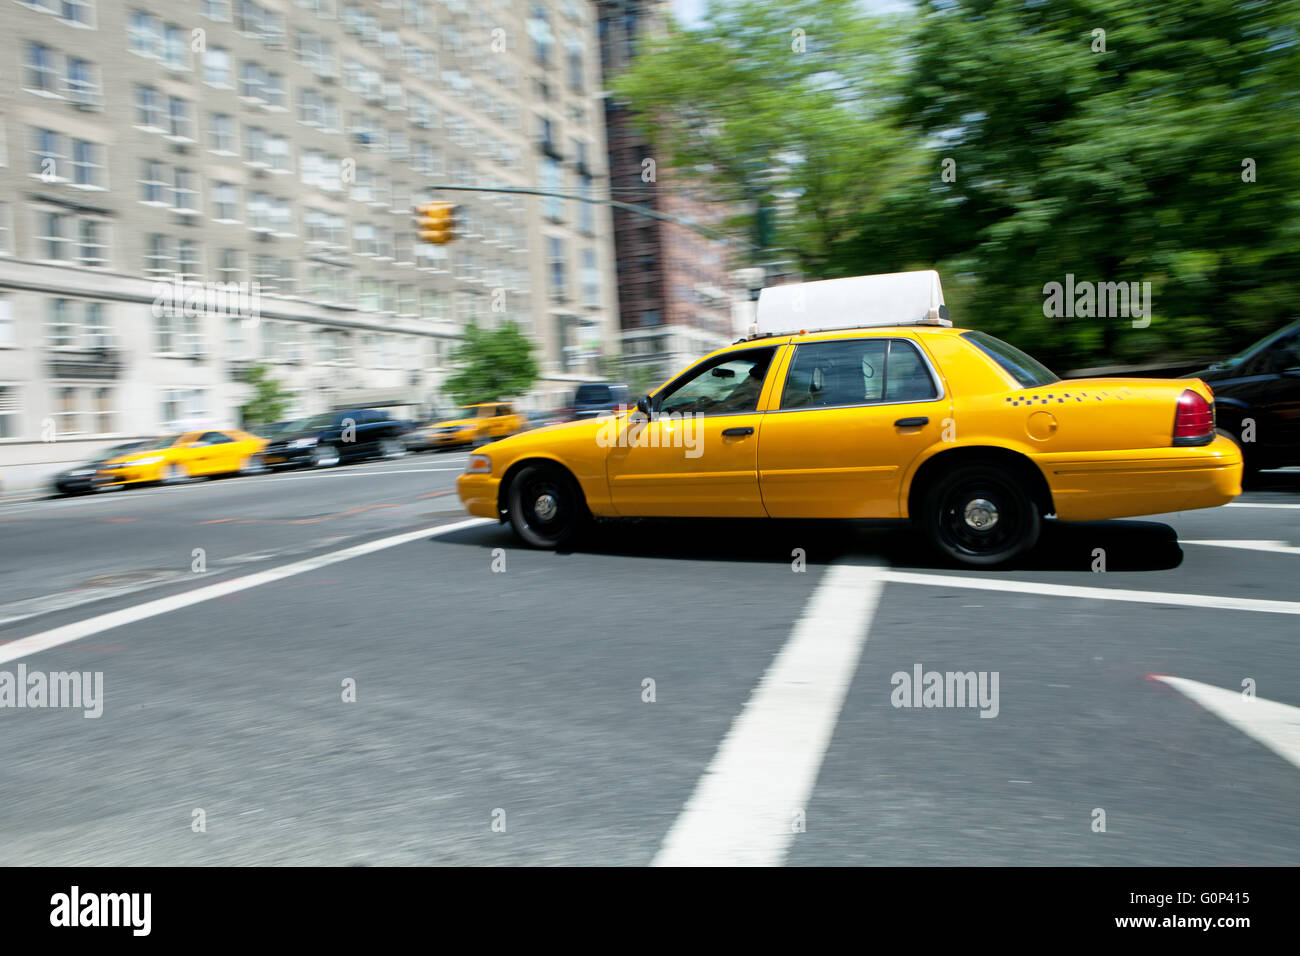 Yellow NYC taxi cab speeding by during daytime.  Slow shutter speed panning technique used for motion blur. Stock Photo